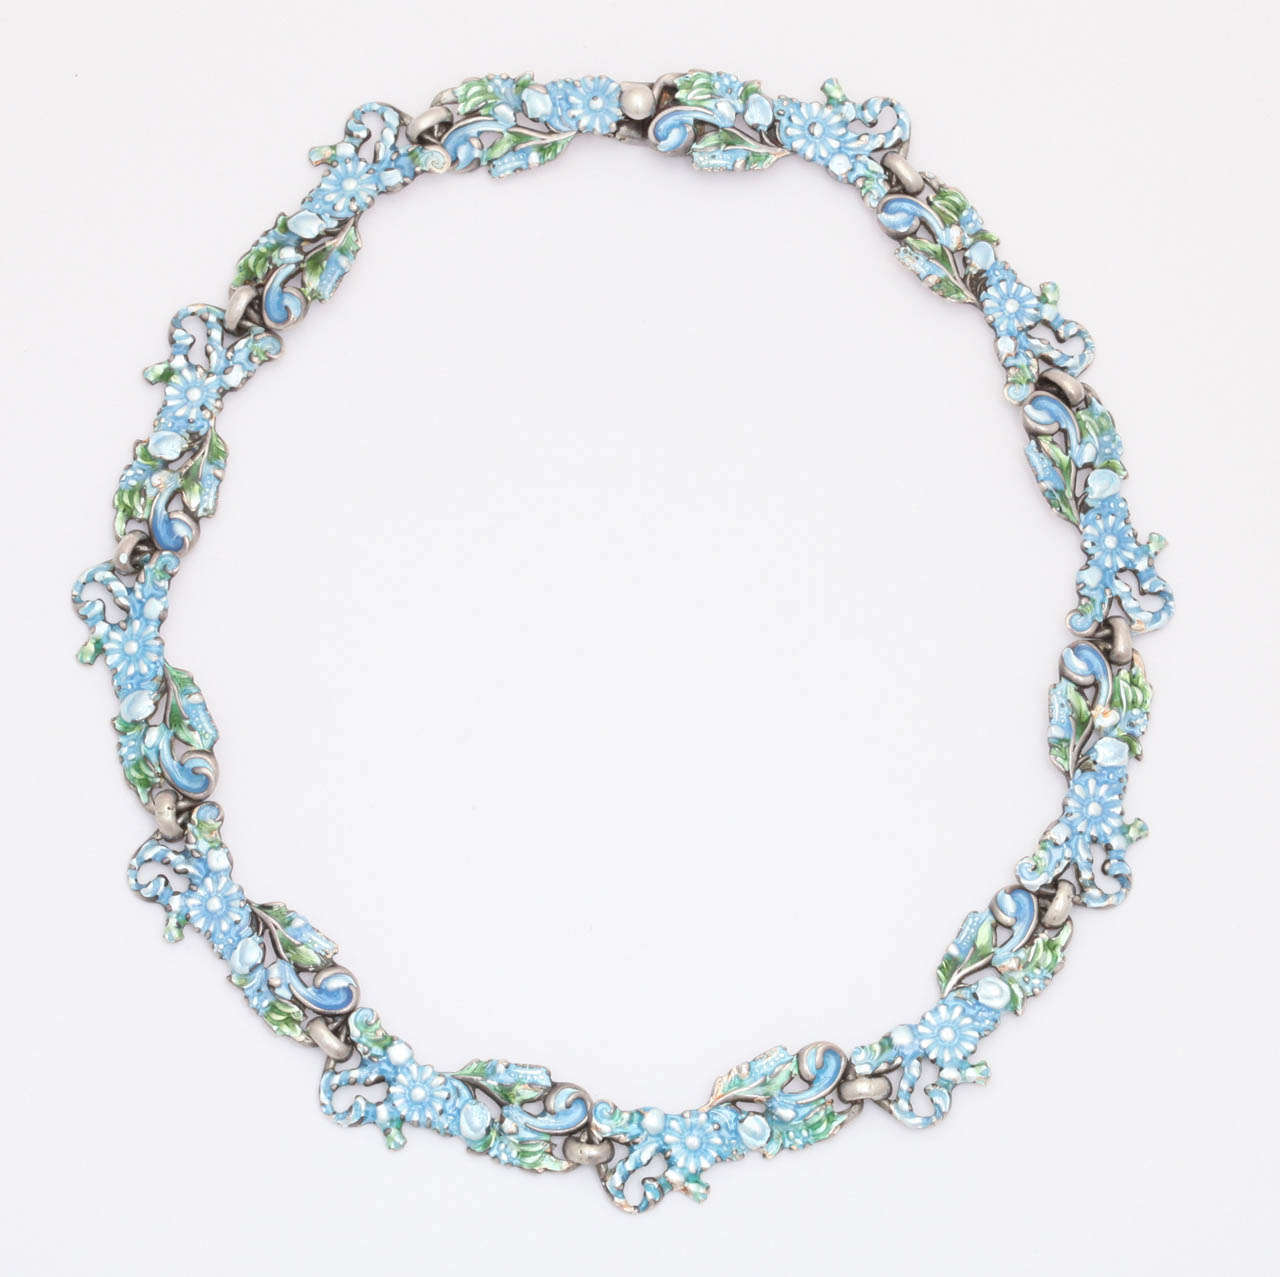 The lustrous enamel of Margot has immediate impact when you see this necklace. The pastel blue and white glows as if pearls were imbedded in the color. The necklace speaks color rather than silver. It can be well enjoyed by day or evening and though